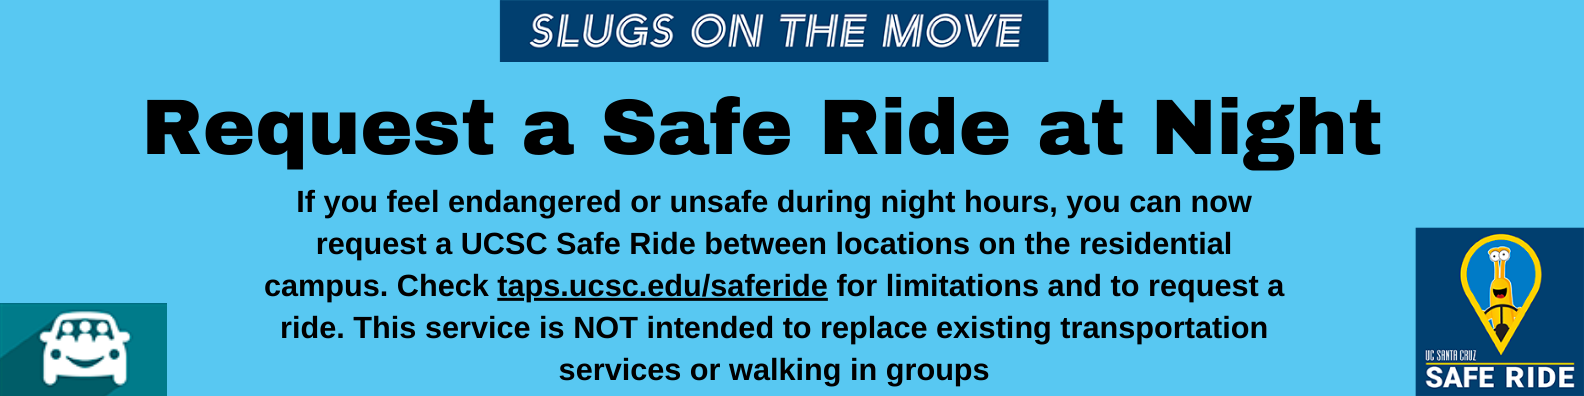 Request a Safe Ride at Night If you feel endangered or unsafe during night hours, you can now request a UCSC Safe Ride between locations on the residential campus. Check taps.ucsc.edu/saferide for limitations and to request a ride. This service is NOT intended to replace existing transportation services or walking in groups.